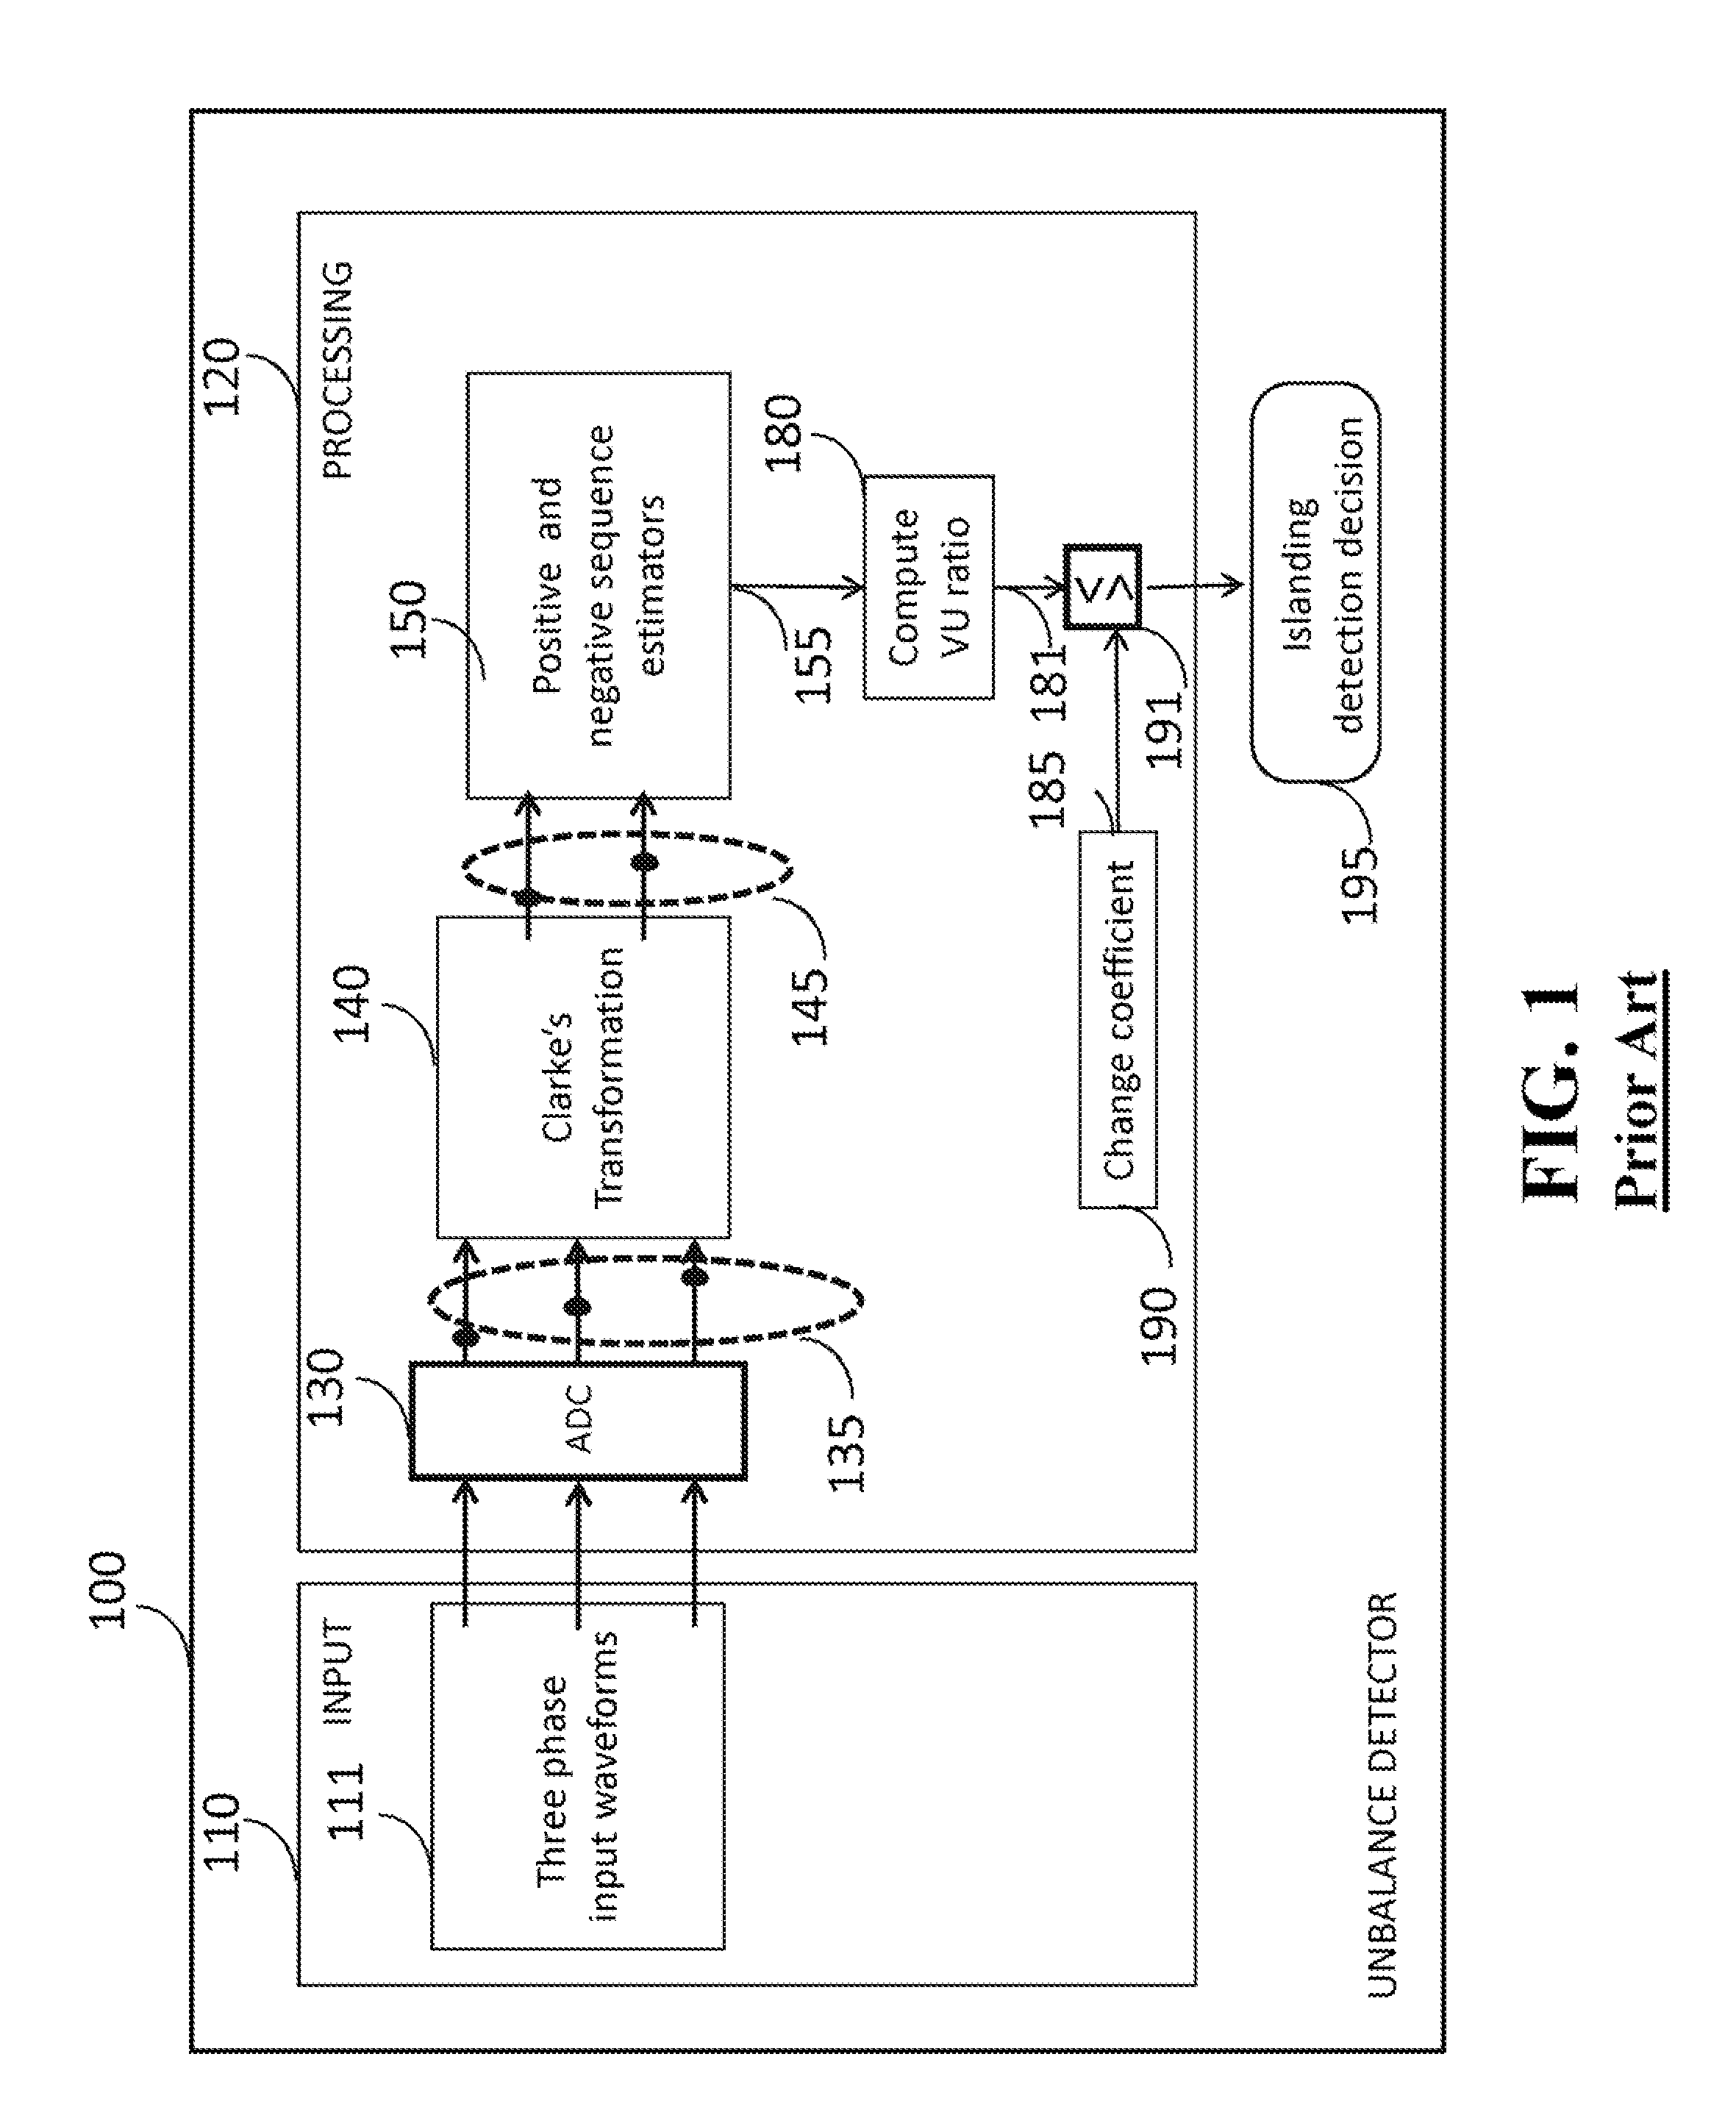 Method and System for Detecting Unbalance in Power Grids